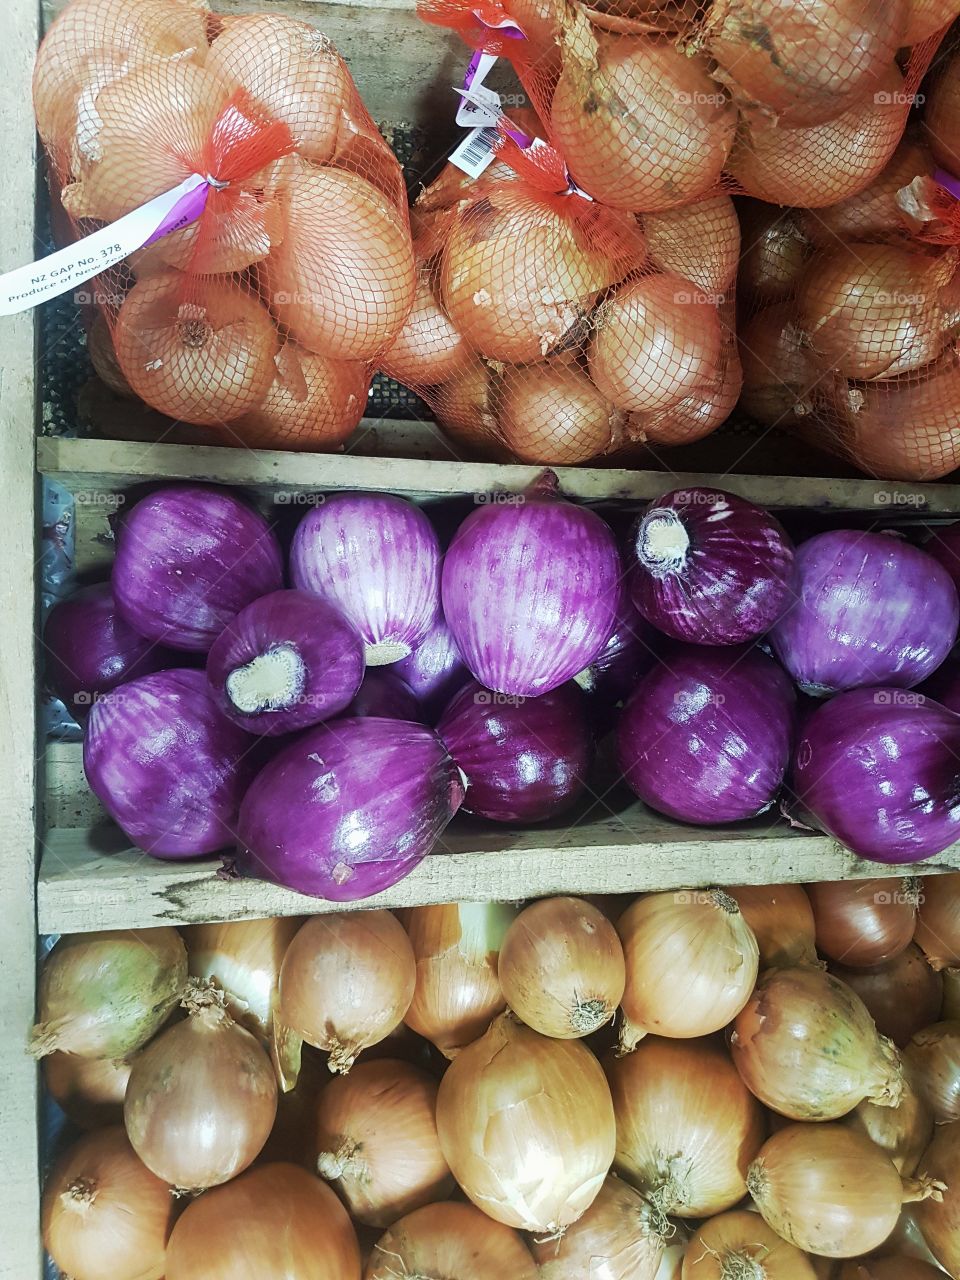 onion varieties market stall fresh fruit and vegetables colours